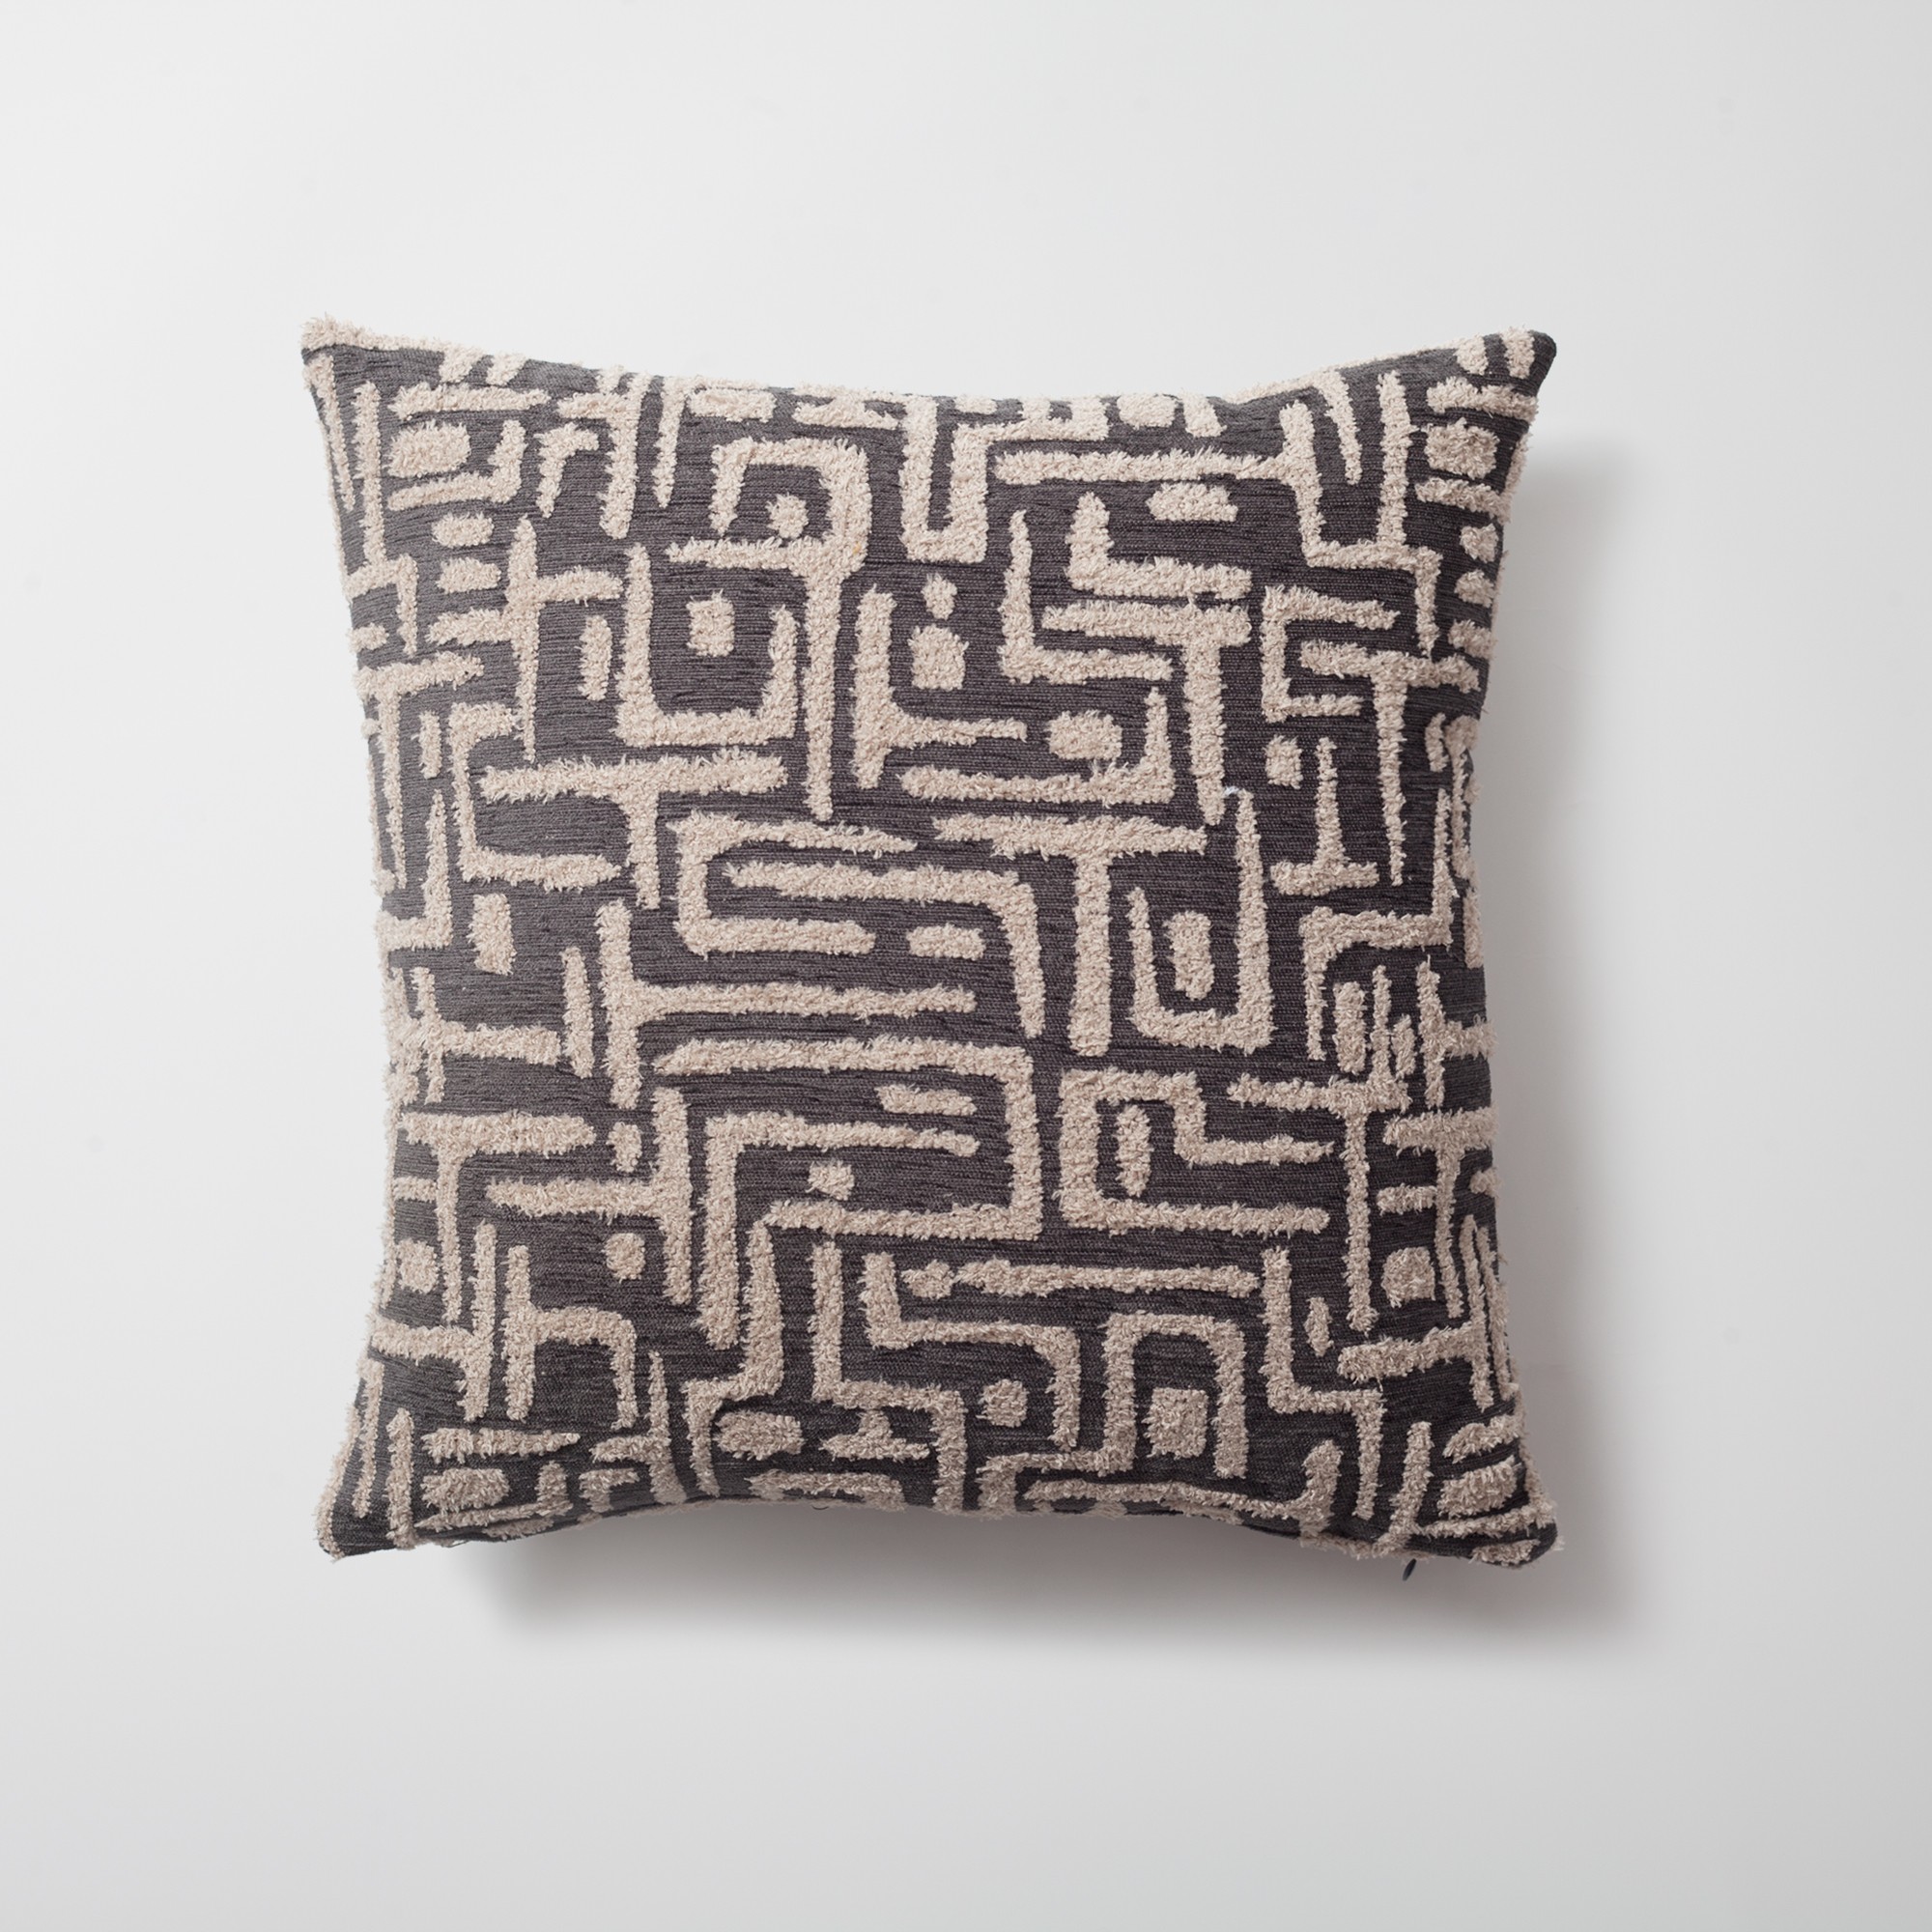 "Gilda" - Maze Patterned Linen Pillow 18x18 Inch - Anthracite (Cover Only)